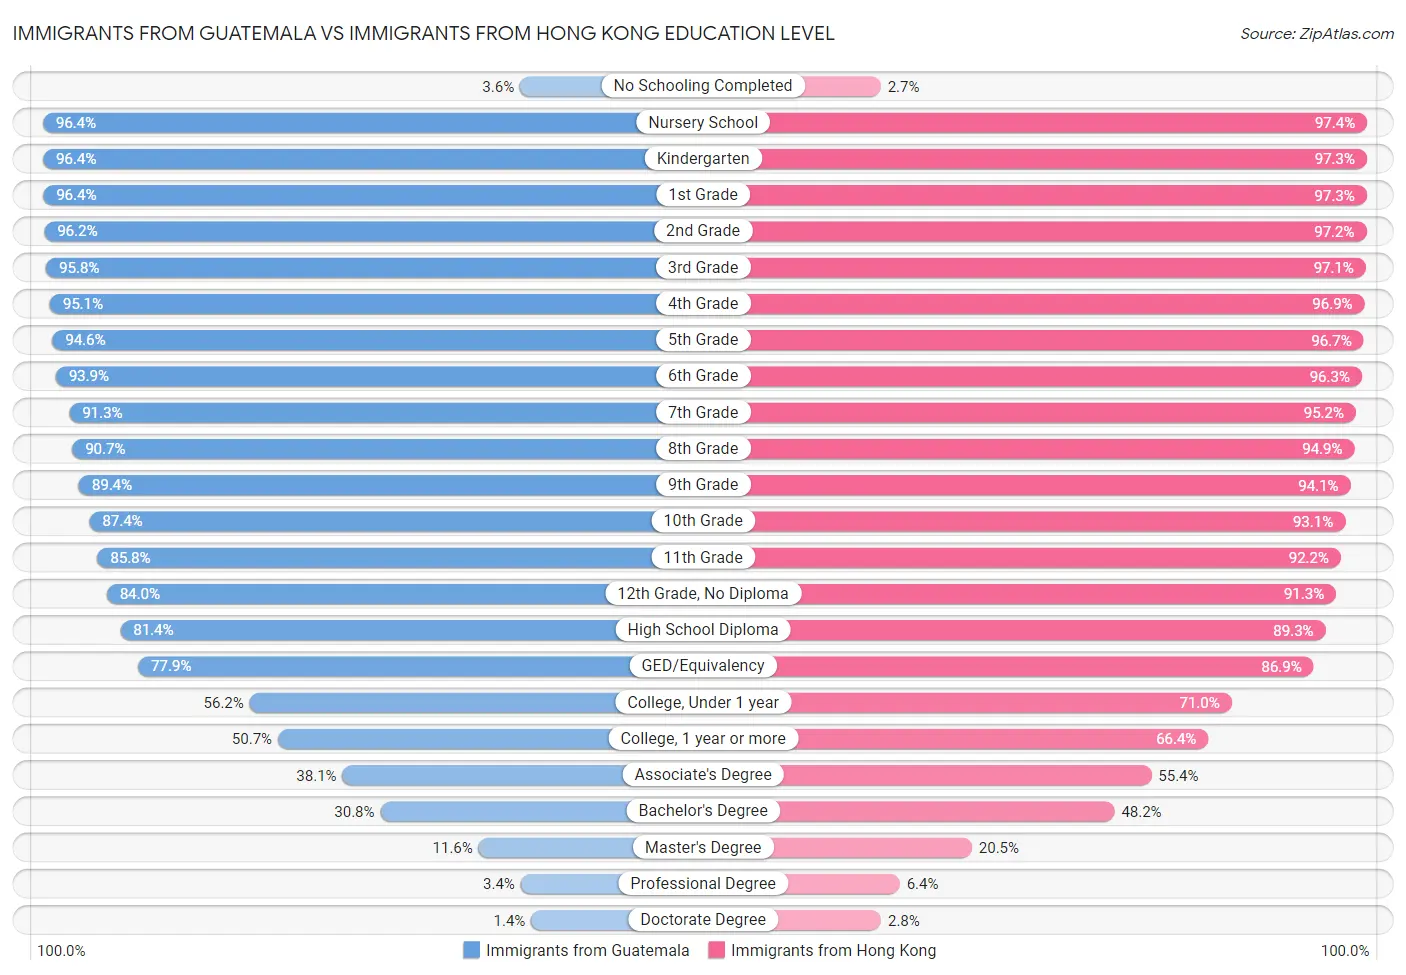 Immigrants from Guatemala vs Immigrants from Hong Kong Education Level